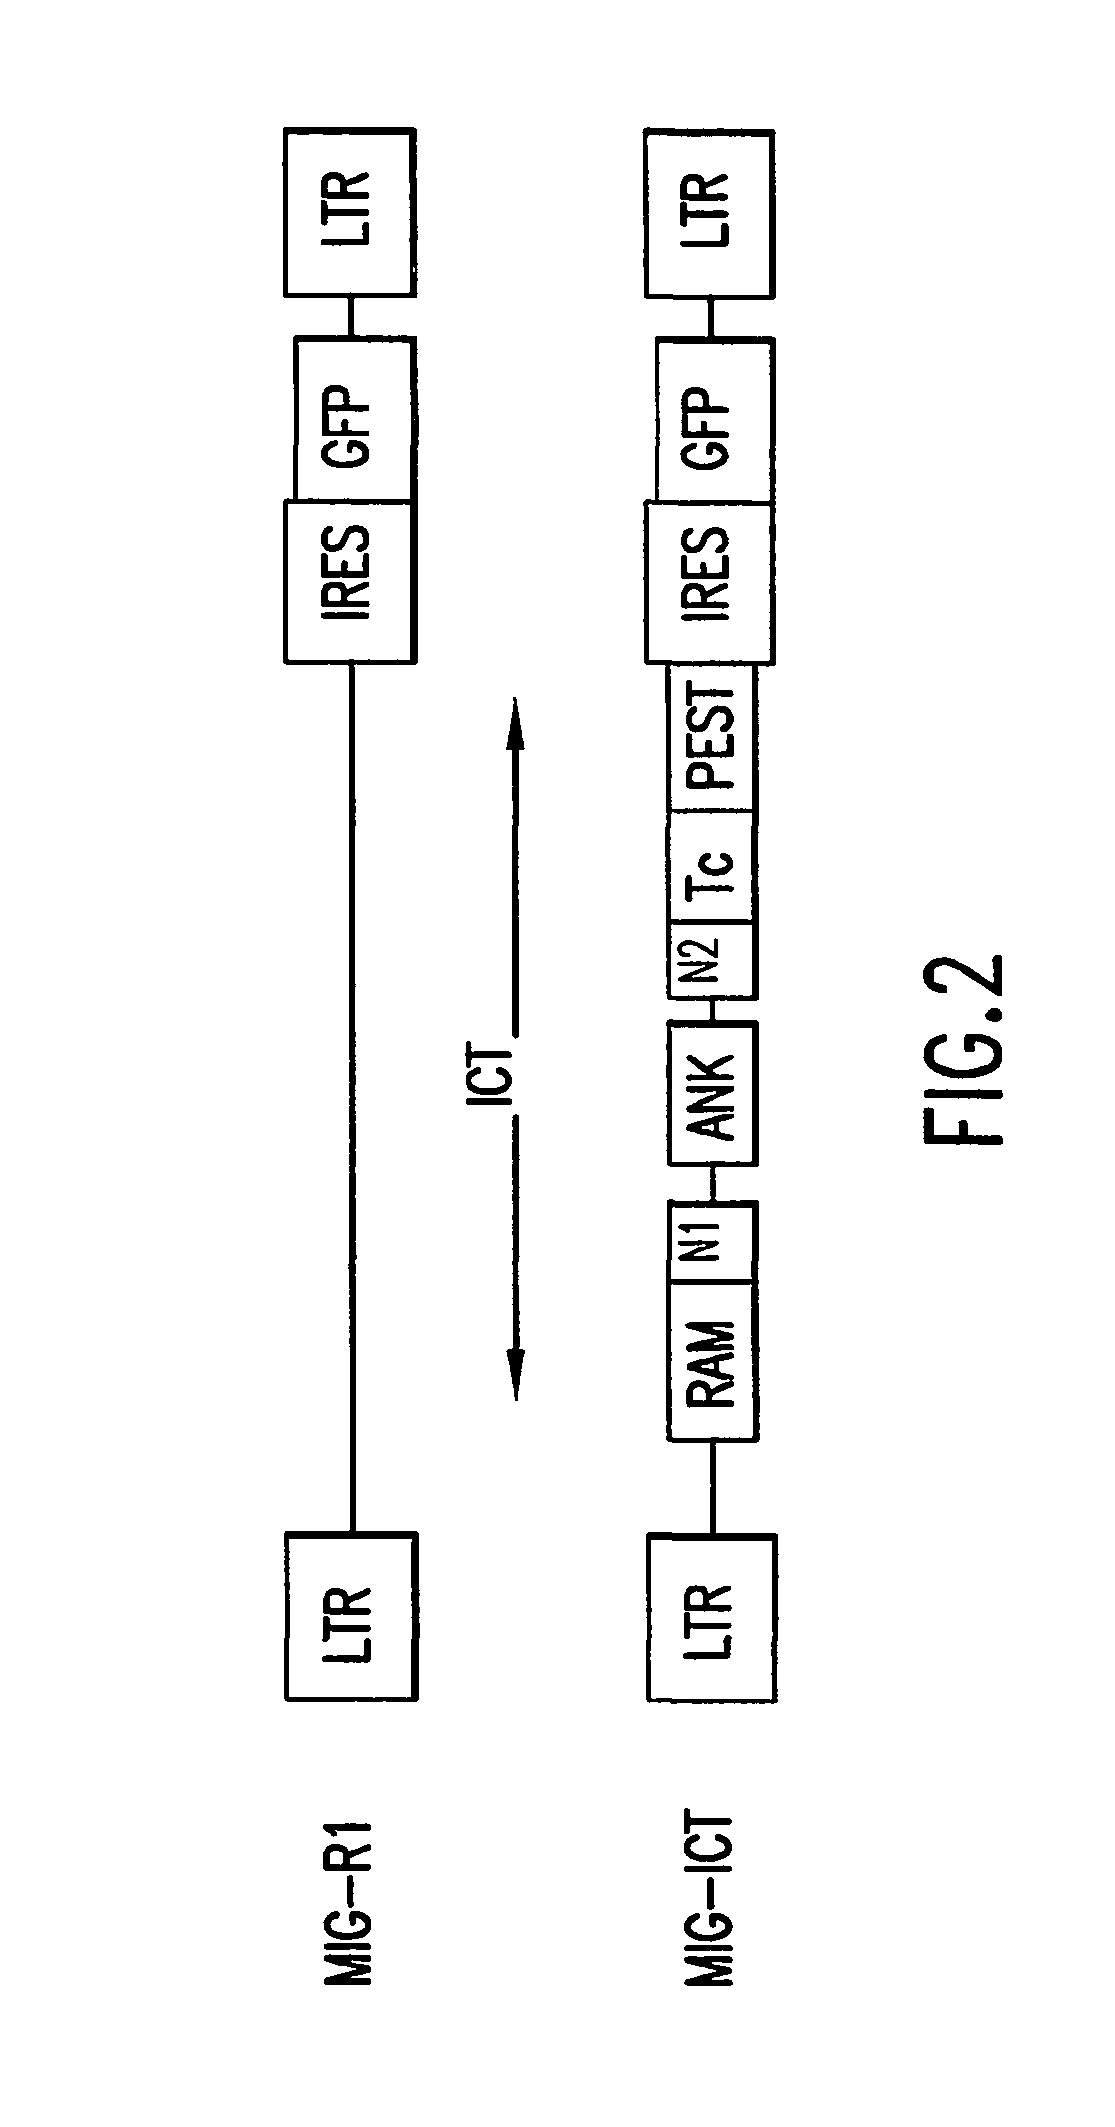 Methods for immortalizing cells